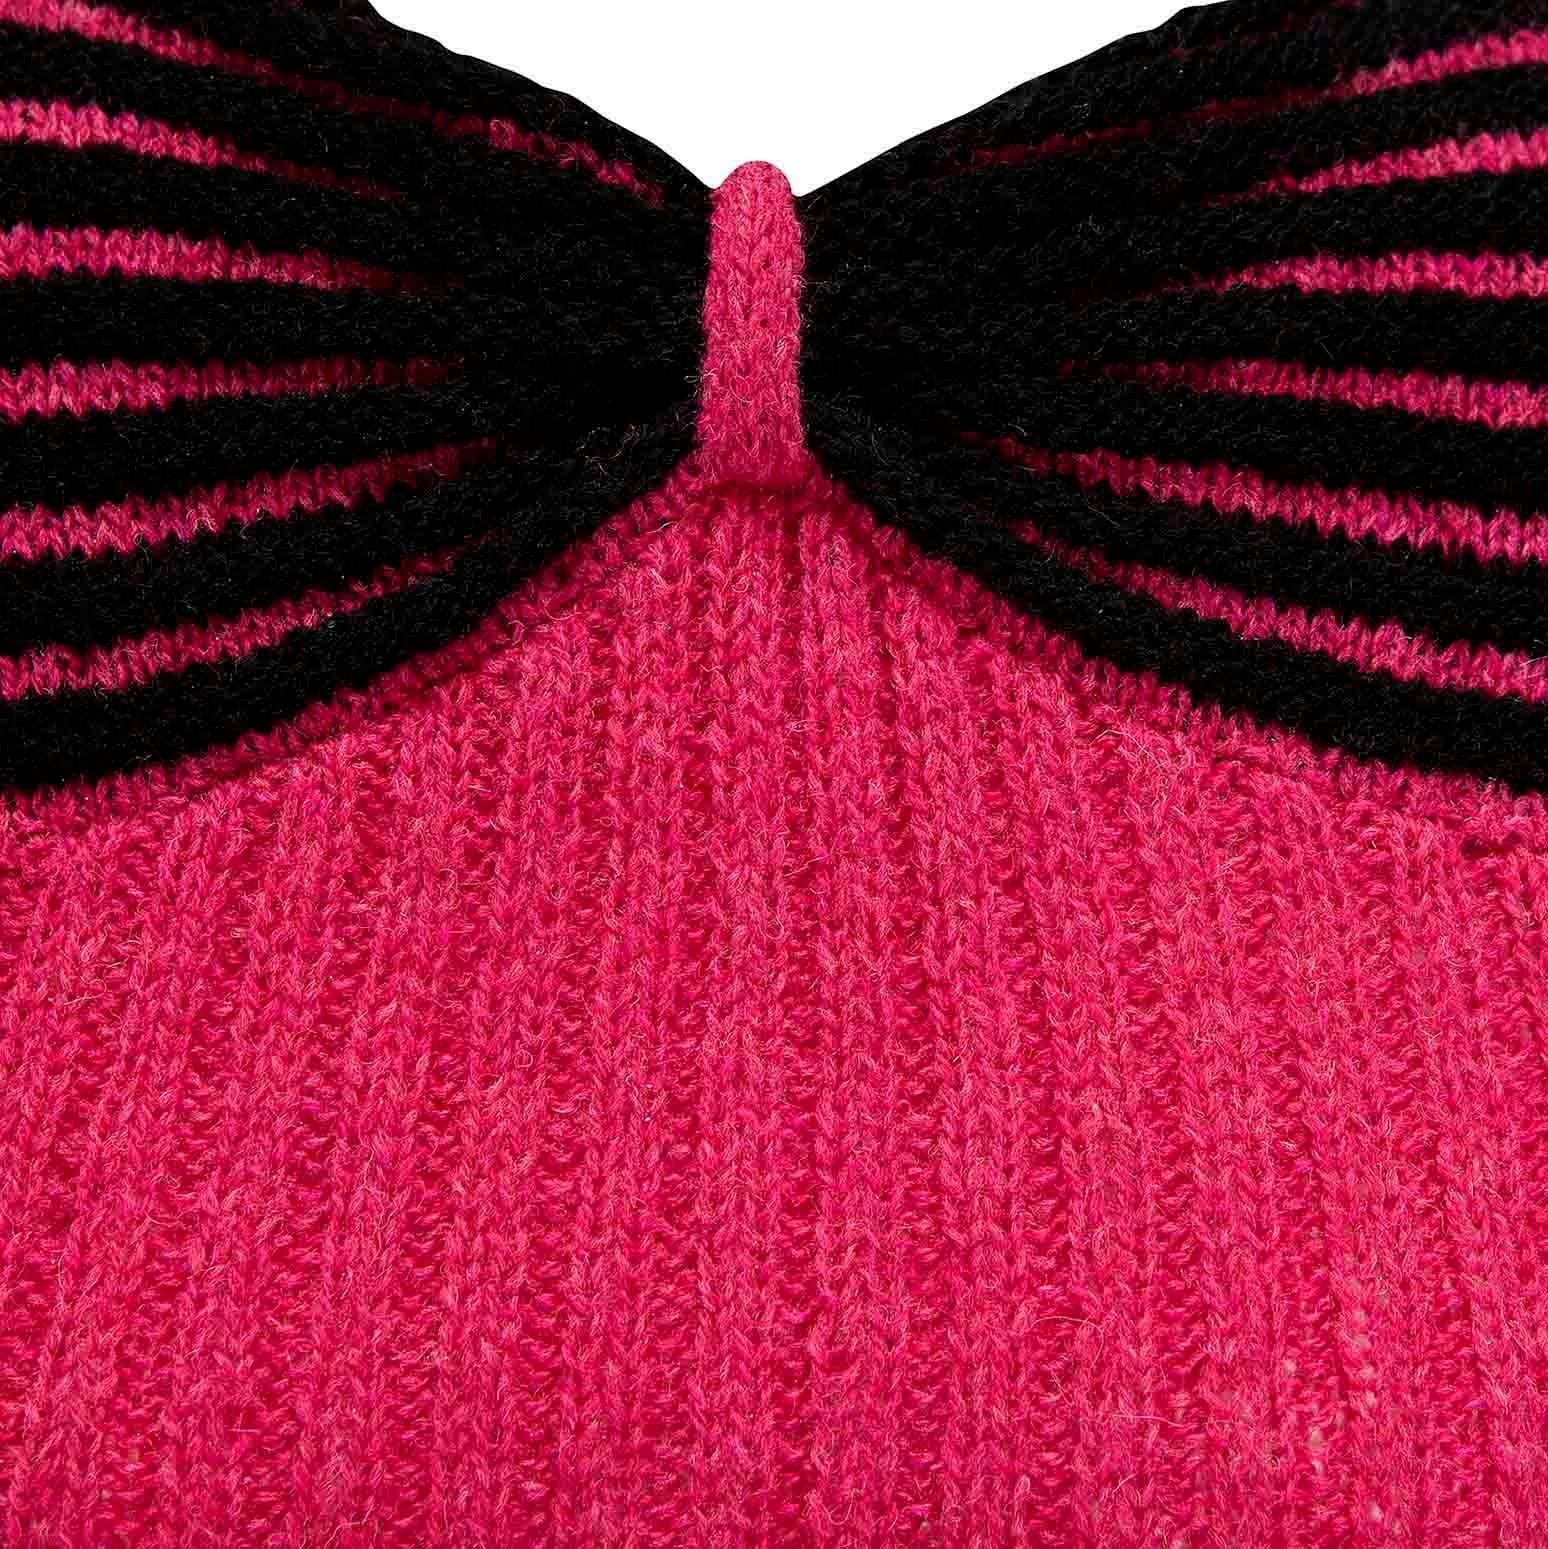 Product Details: Hand Knitted Sweater - Back Button Detail - 3/4 Length Sleeves - Puff Sleeve Detail - Contrasting Black Knitted Bow Effect / Front Sweater
Label: Unknown
Era: c.1950
Fabric Content: Wool
Size: UK 10
Bust: 30/36